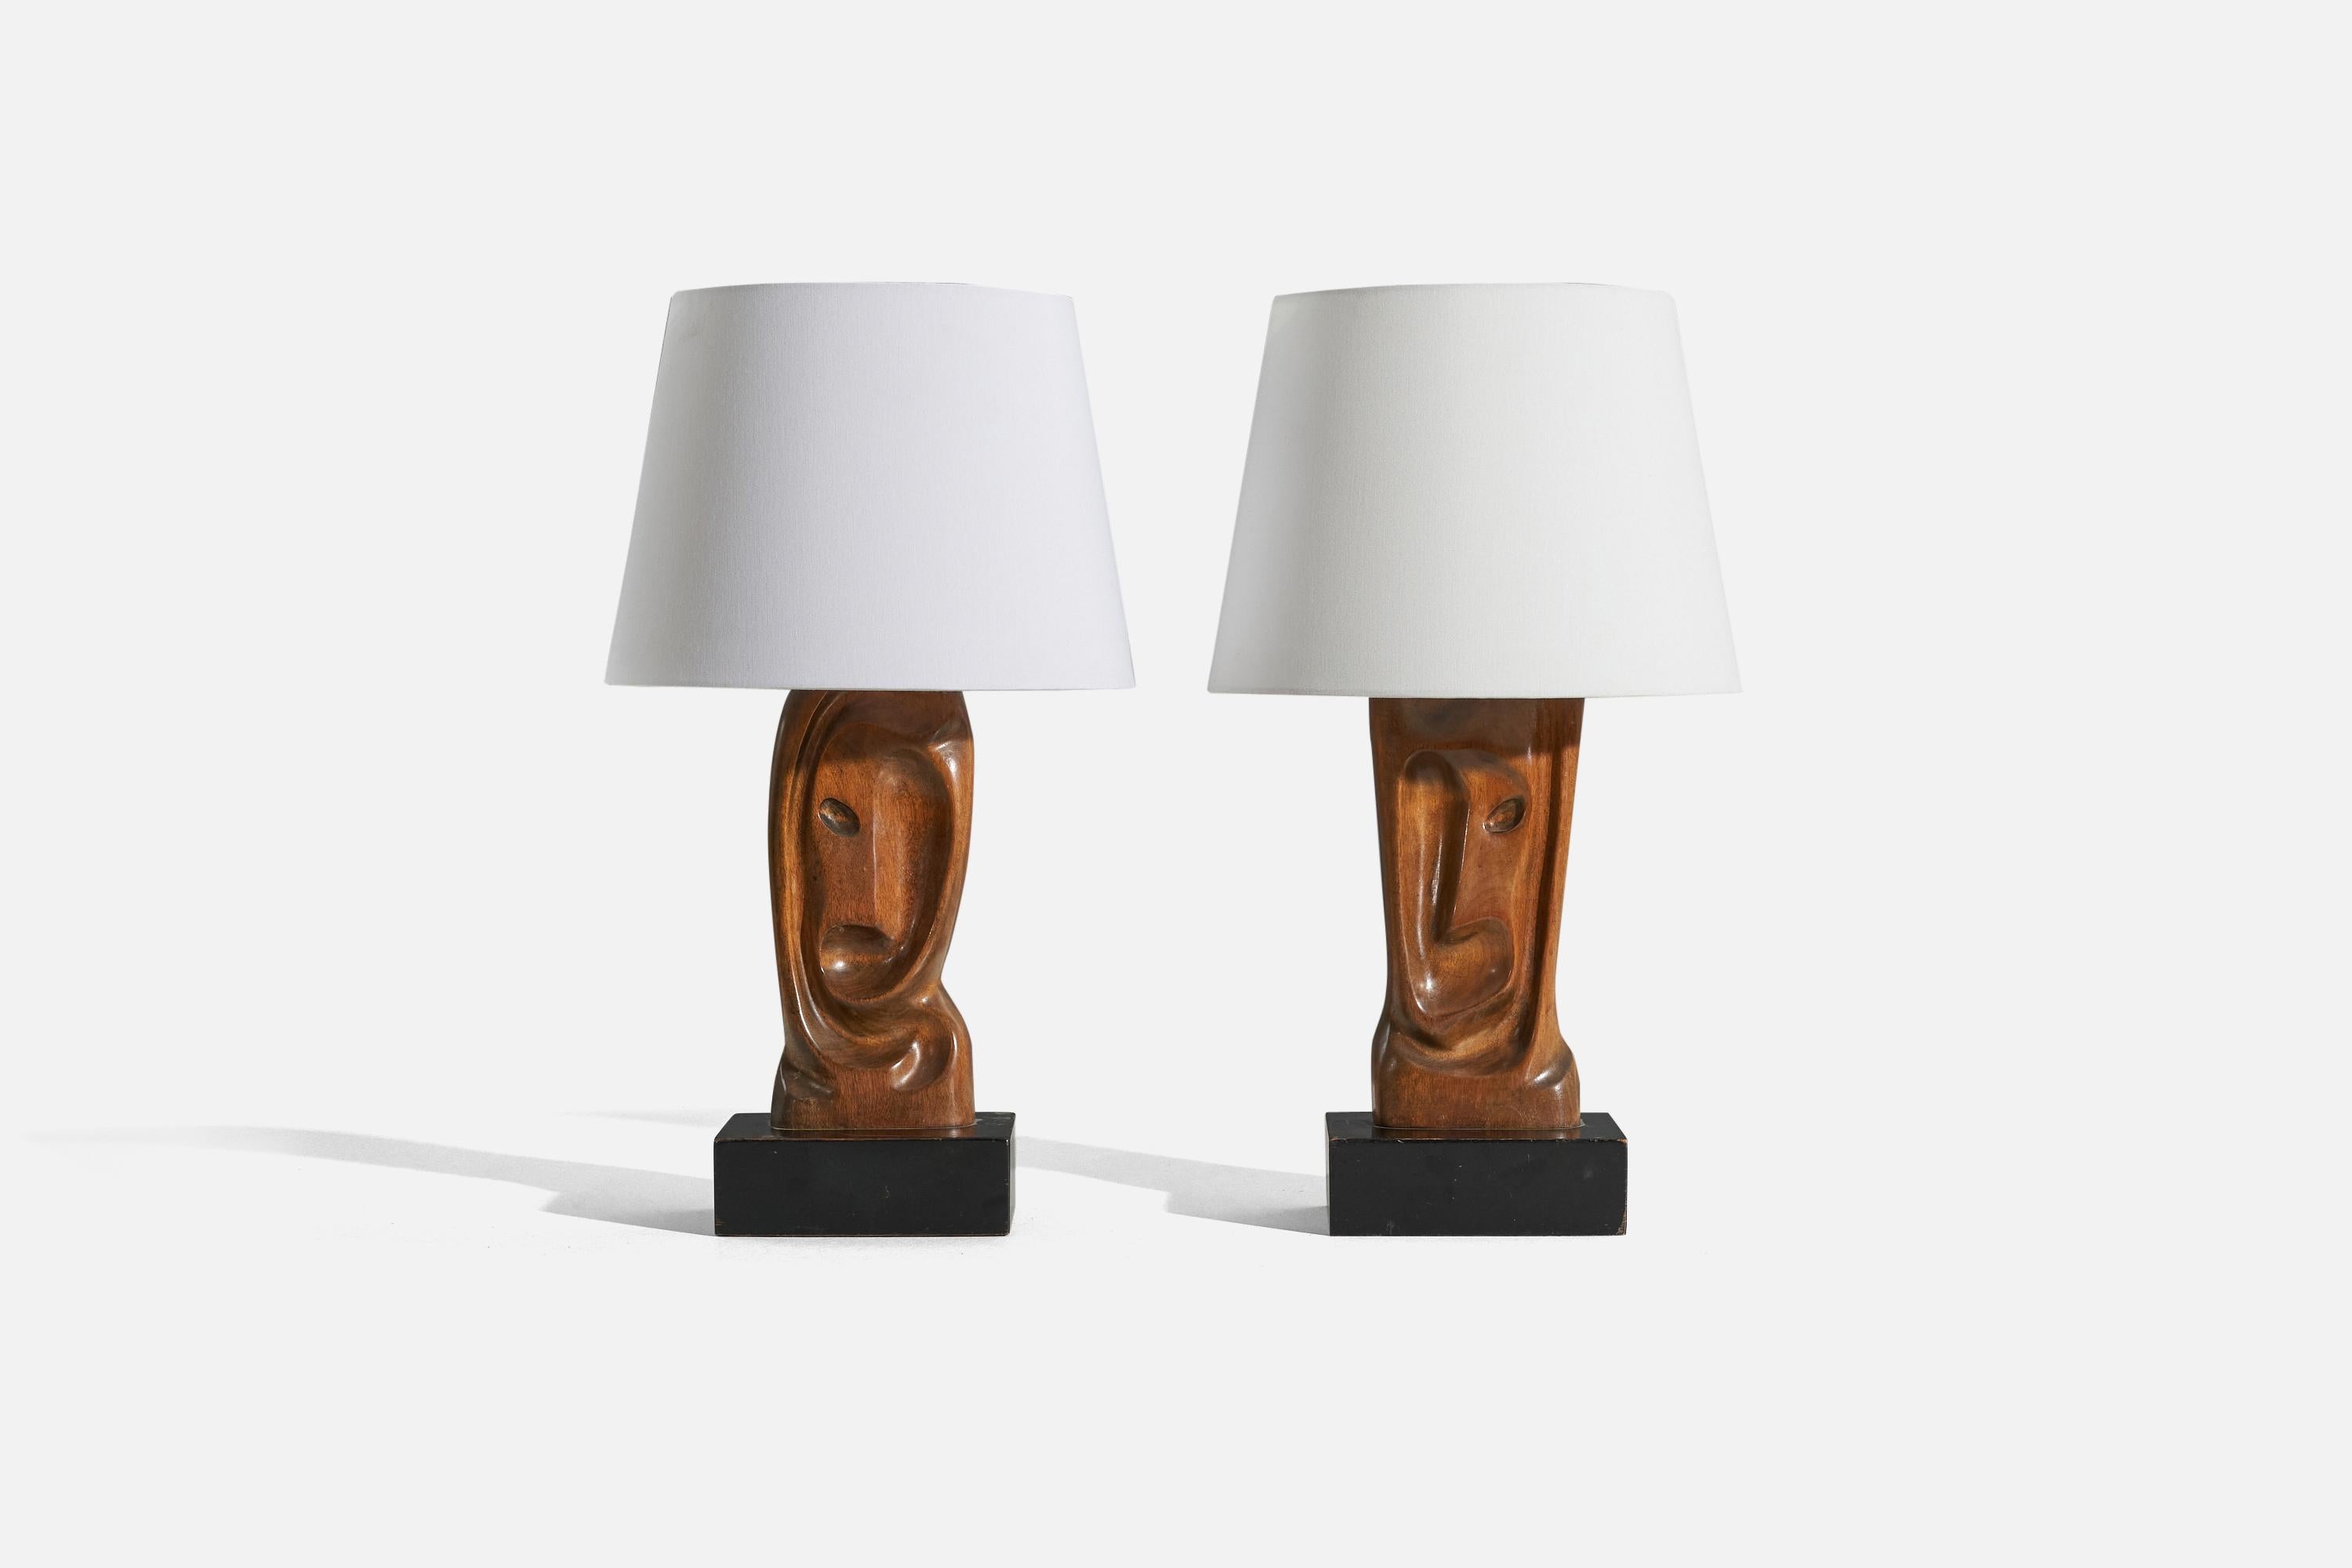 A pair of oak table lamps designed and produced in the United States, 1950s.

Sold without lampshade. 
Dimensions of Lamp (inches) : 17 x 6.625 x 6.625 (H x W x D)
Dimensions of Shade (inches) : 15.9375 x 12 x 9 (T x B x S)
Dimension of Lamp